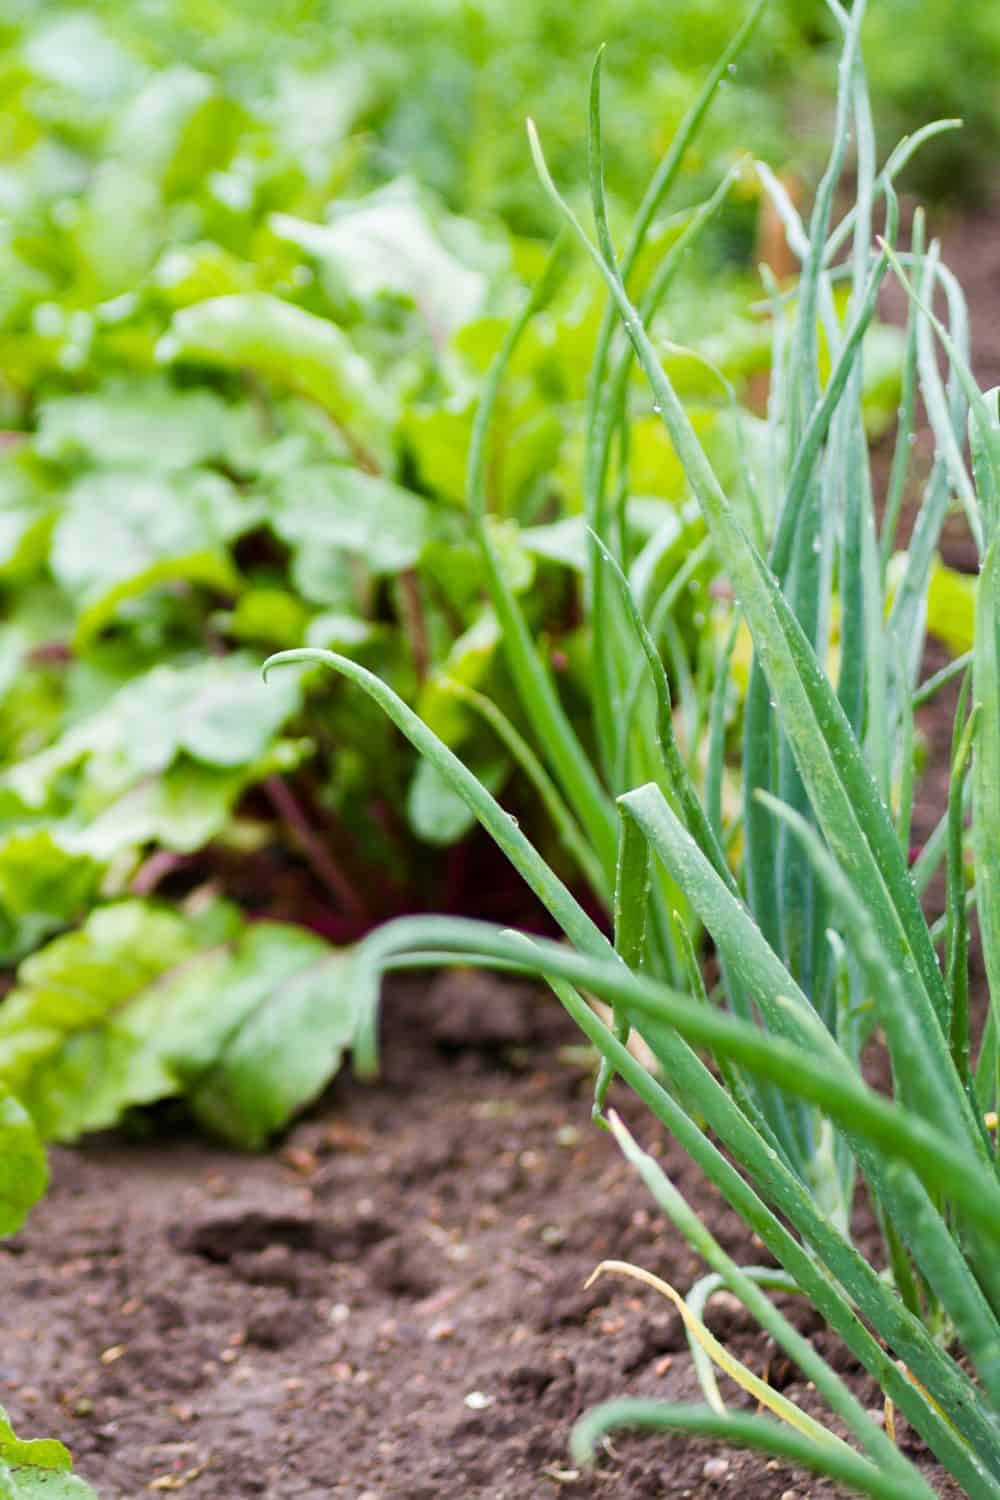 onions and swiss chard growing next to each other in the garden